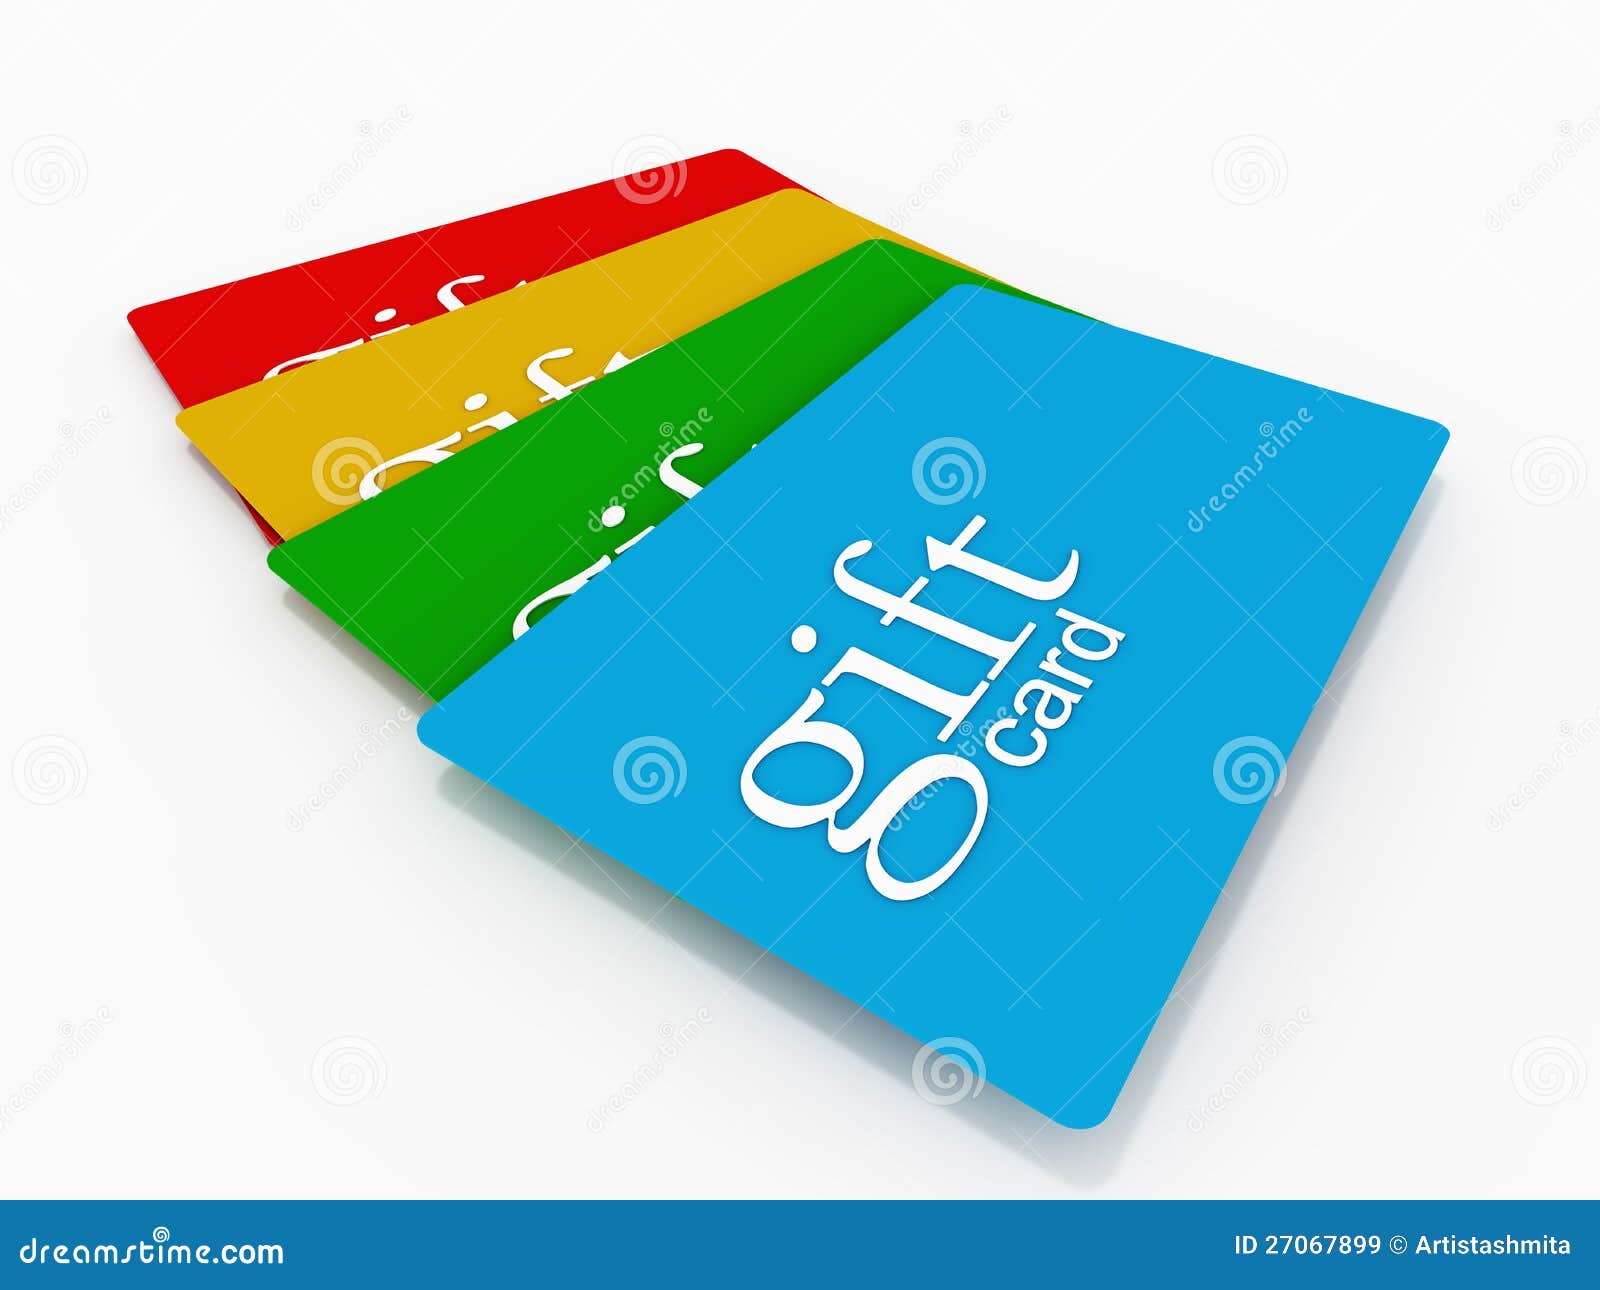 free gift card clipart - photo #21